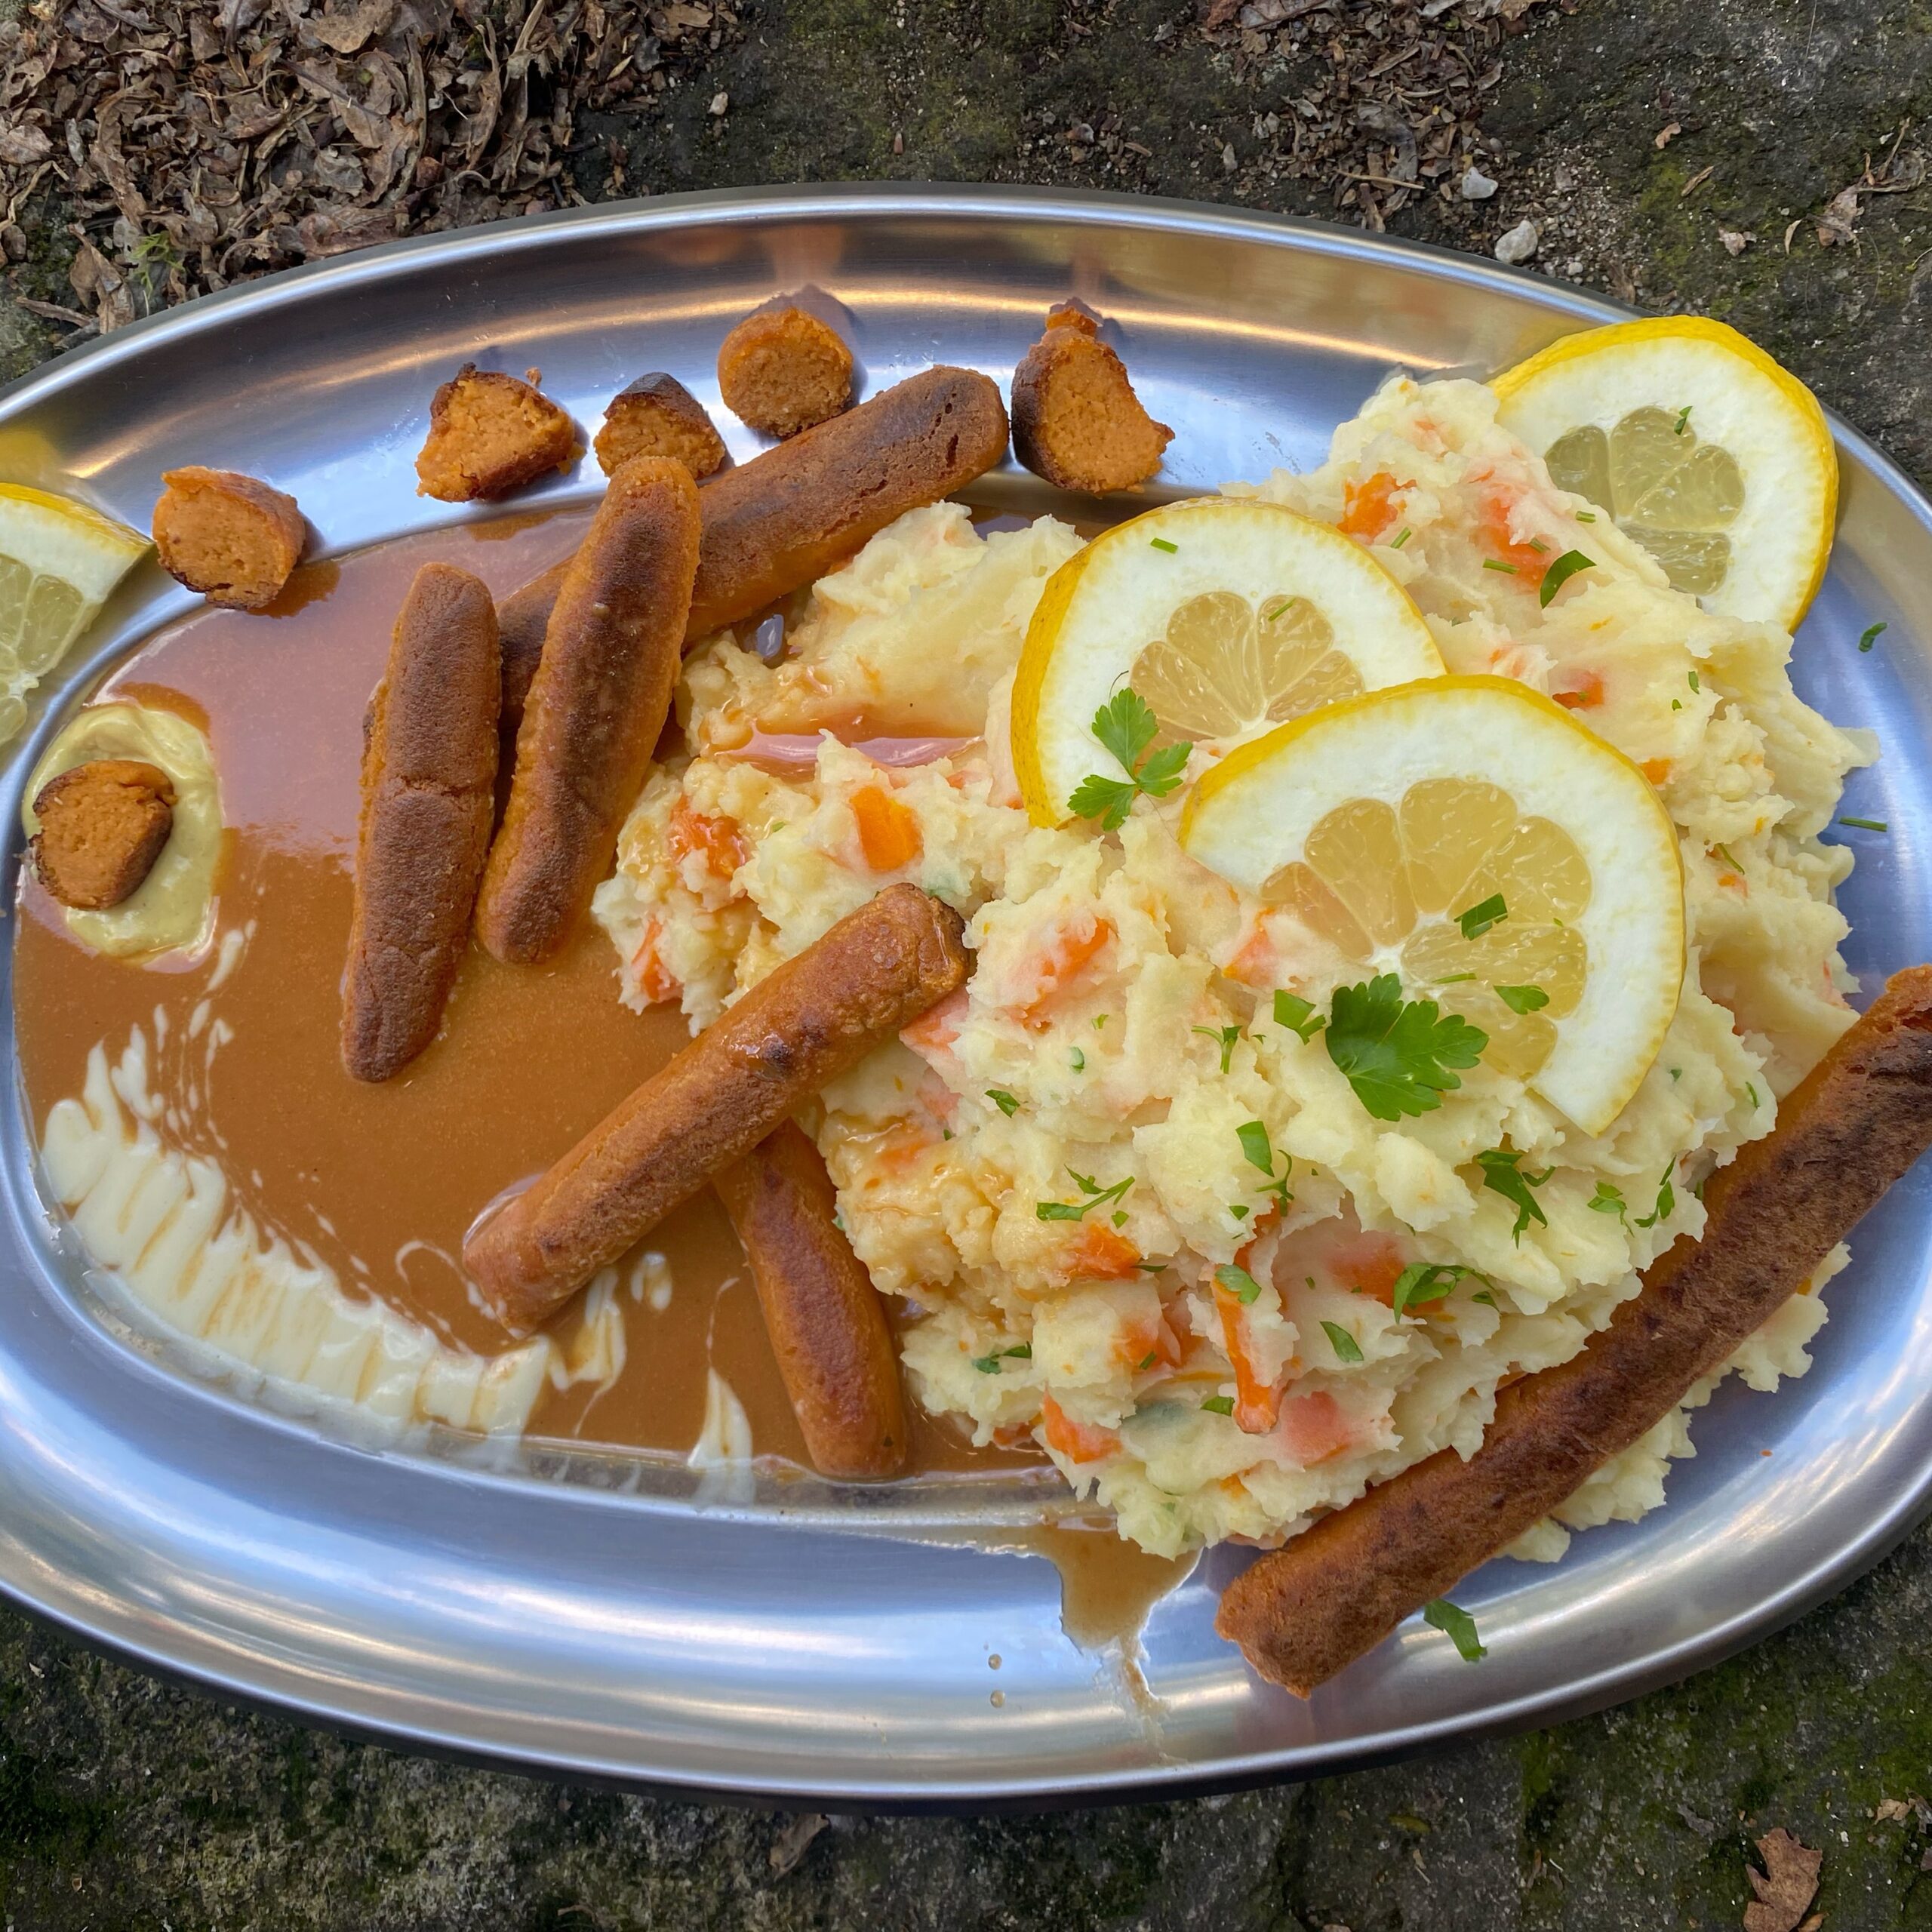 mashed potatoes and carrots and vegan sausages arranged in a mahagoni sauce on a silver plate.